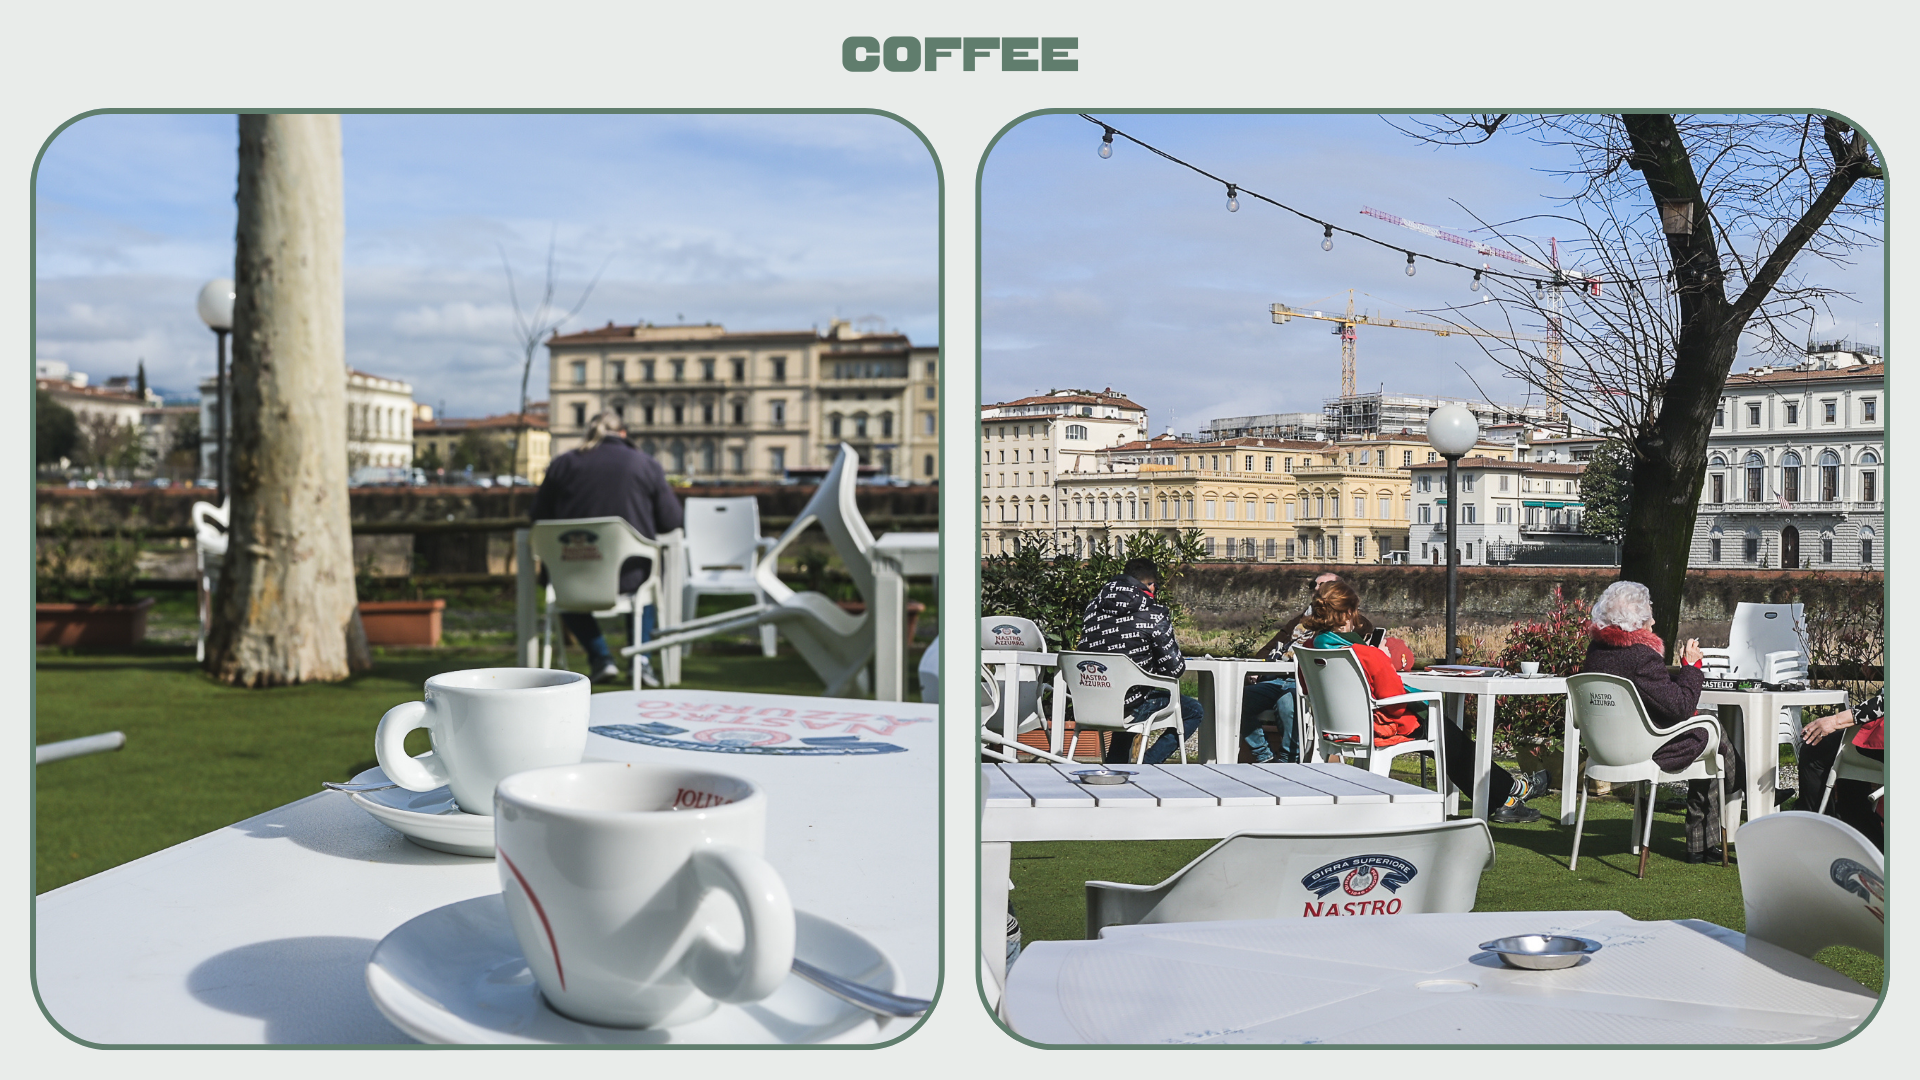 A group of elderly people sit at an outdoor terrace at Circolo Rondinella enjoying coffee and views of Florence